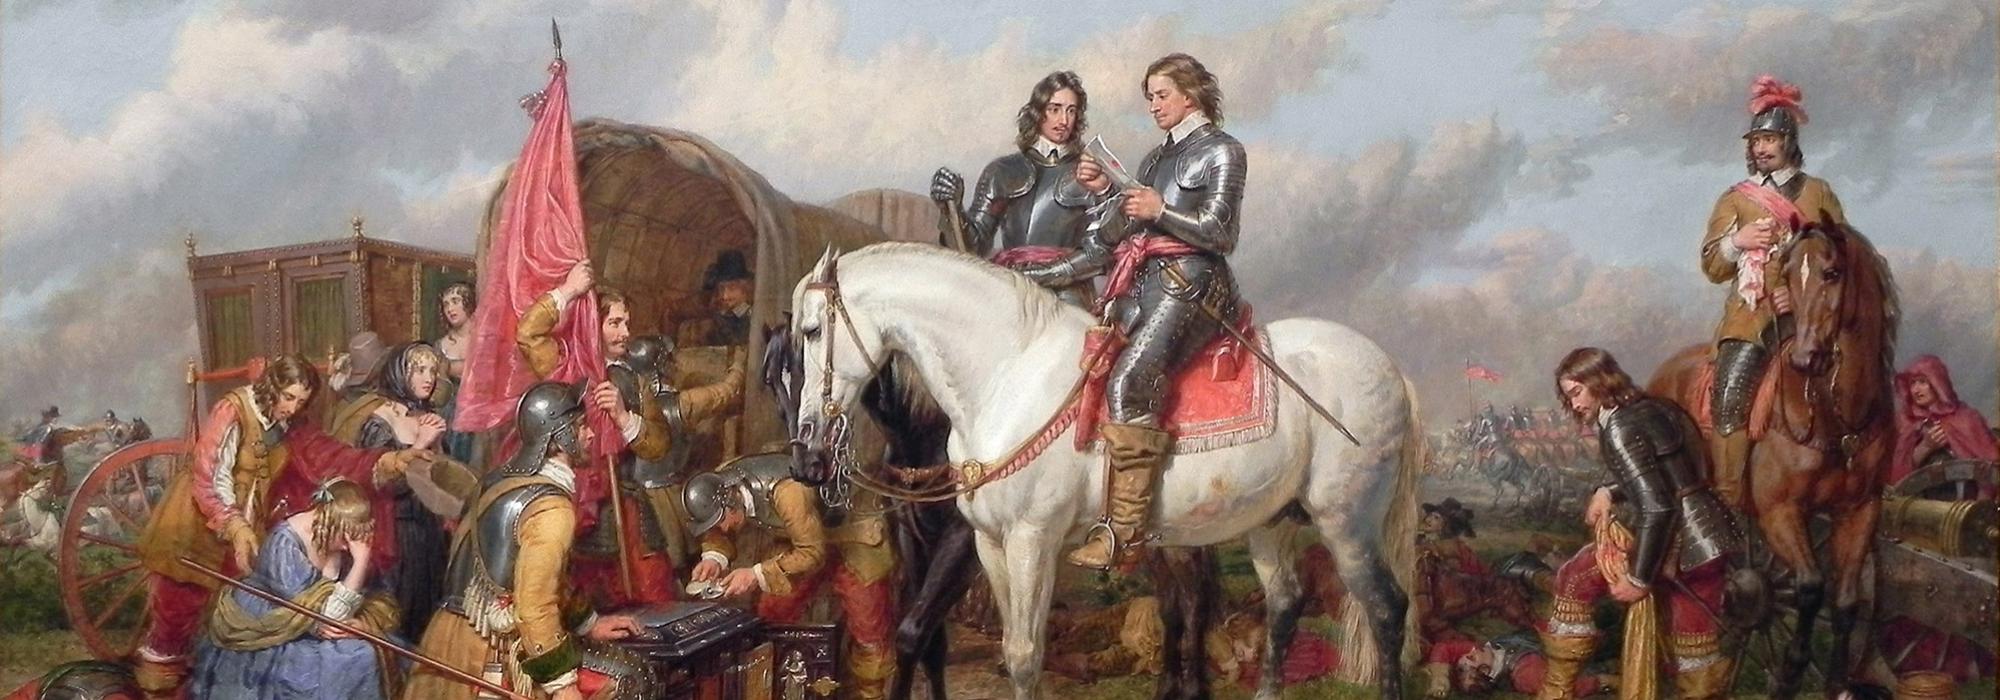 "Cromwell at the Battle of Naseby in 1645" by Charles Landseer, from the collection of the Alte Nationalgalerie, Berlin, used under CC BY-NC-SA license